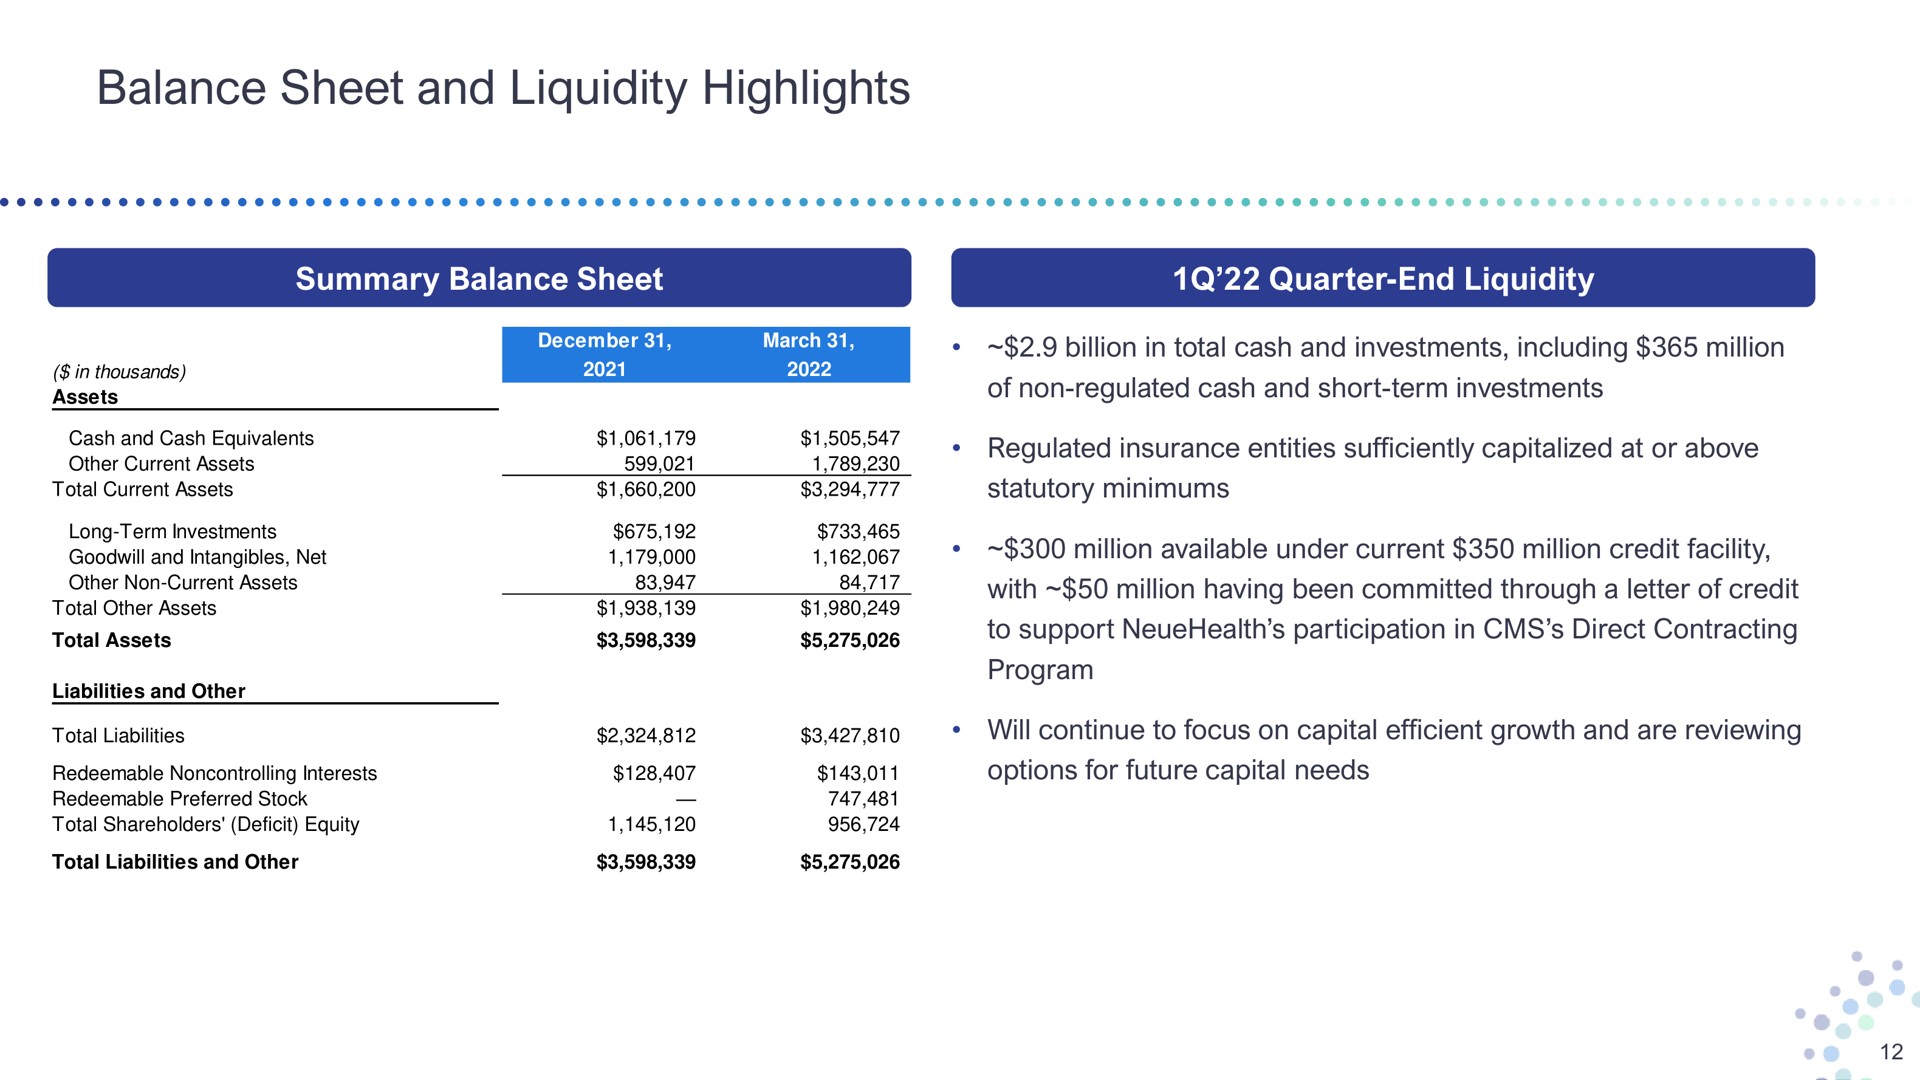 balance sheet and liquidity highlights summary quarter end assets oiler total current assets billion in total cash investments including million of non regulated cash short term investments regulated insurance entities sufficiently capitalized at or above statutory minimums goodwill intangibles net other non current assets with million having been committed through a letter of credit to support participation in direct contracting million available under current million credit facility total other assets total assets total liabilities redeemable noncontrolling interests program will continue to focus on capital efficient growth are reviewing options for future capital needs | Bright Health Group